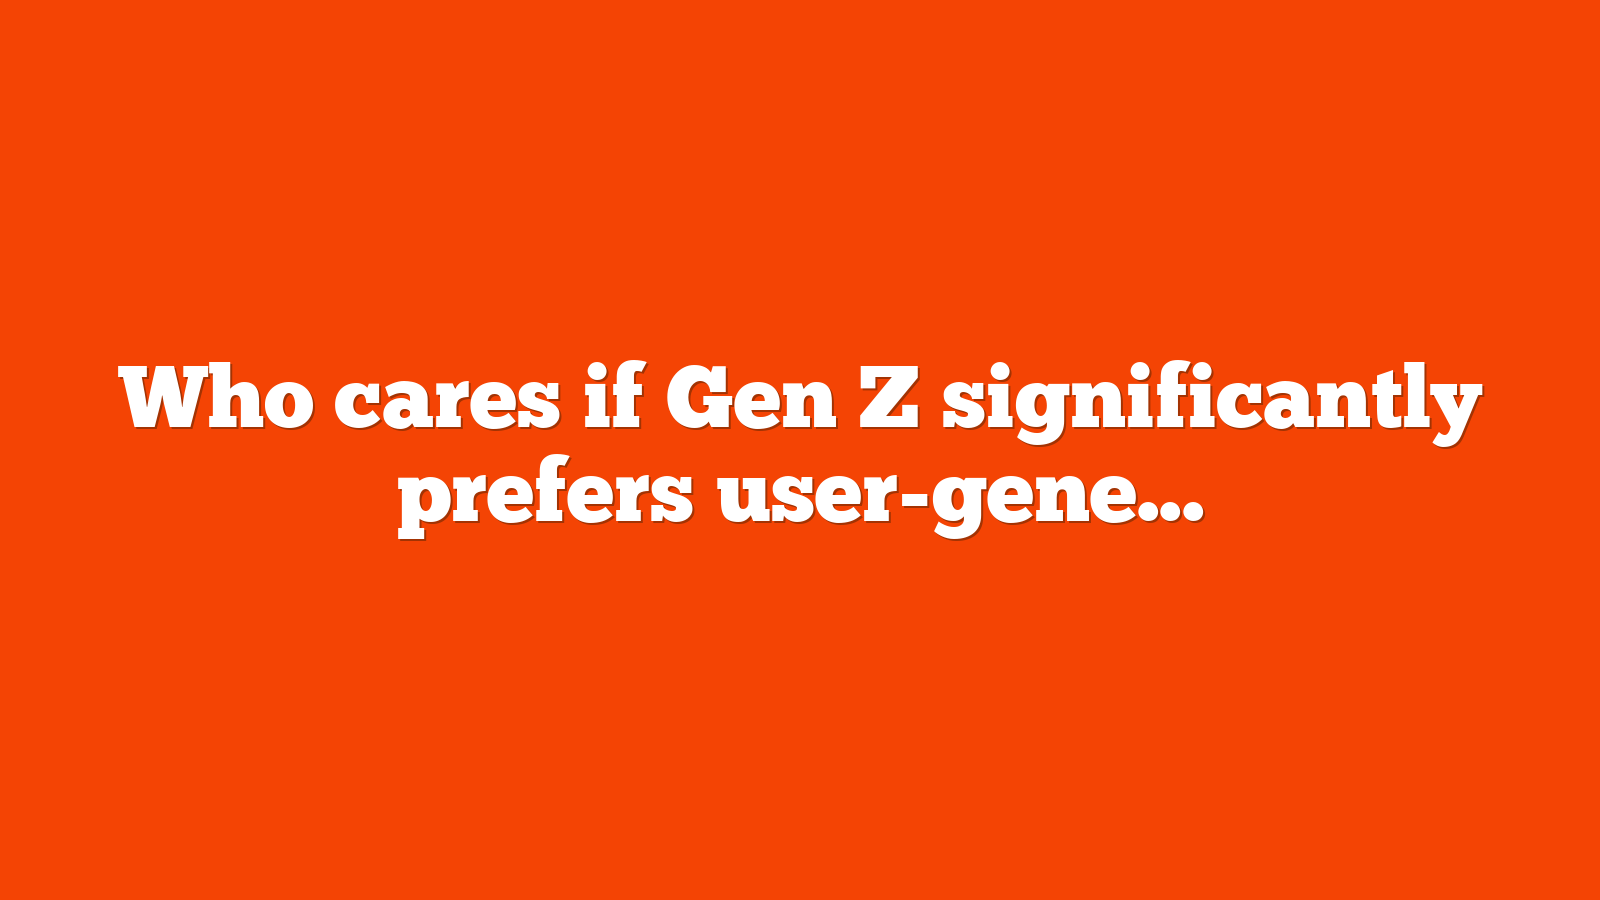 Who cares if Gen Z significantly prefers user-generated content?